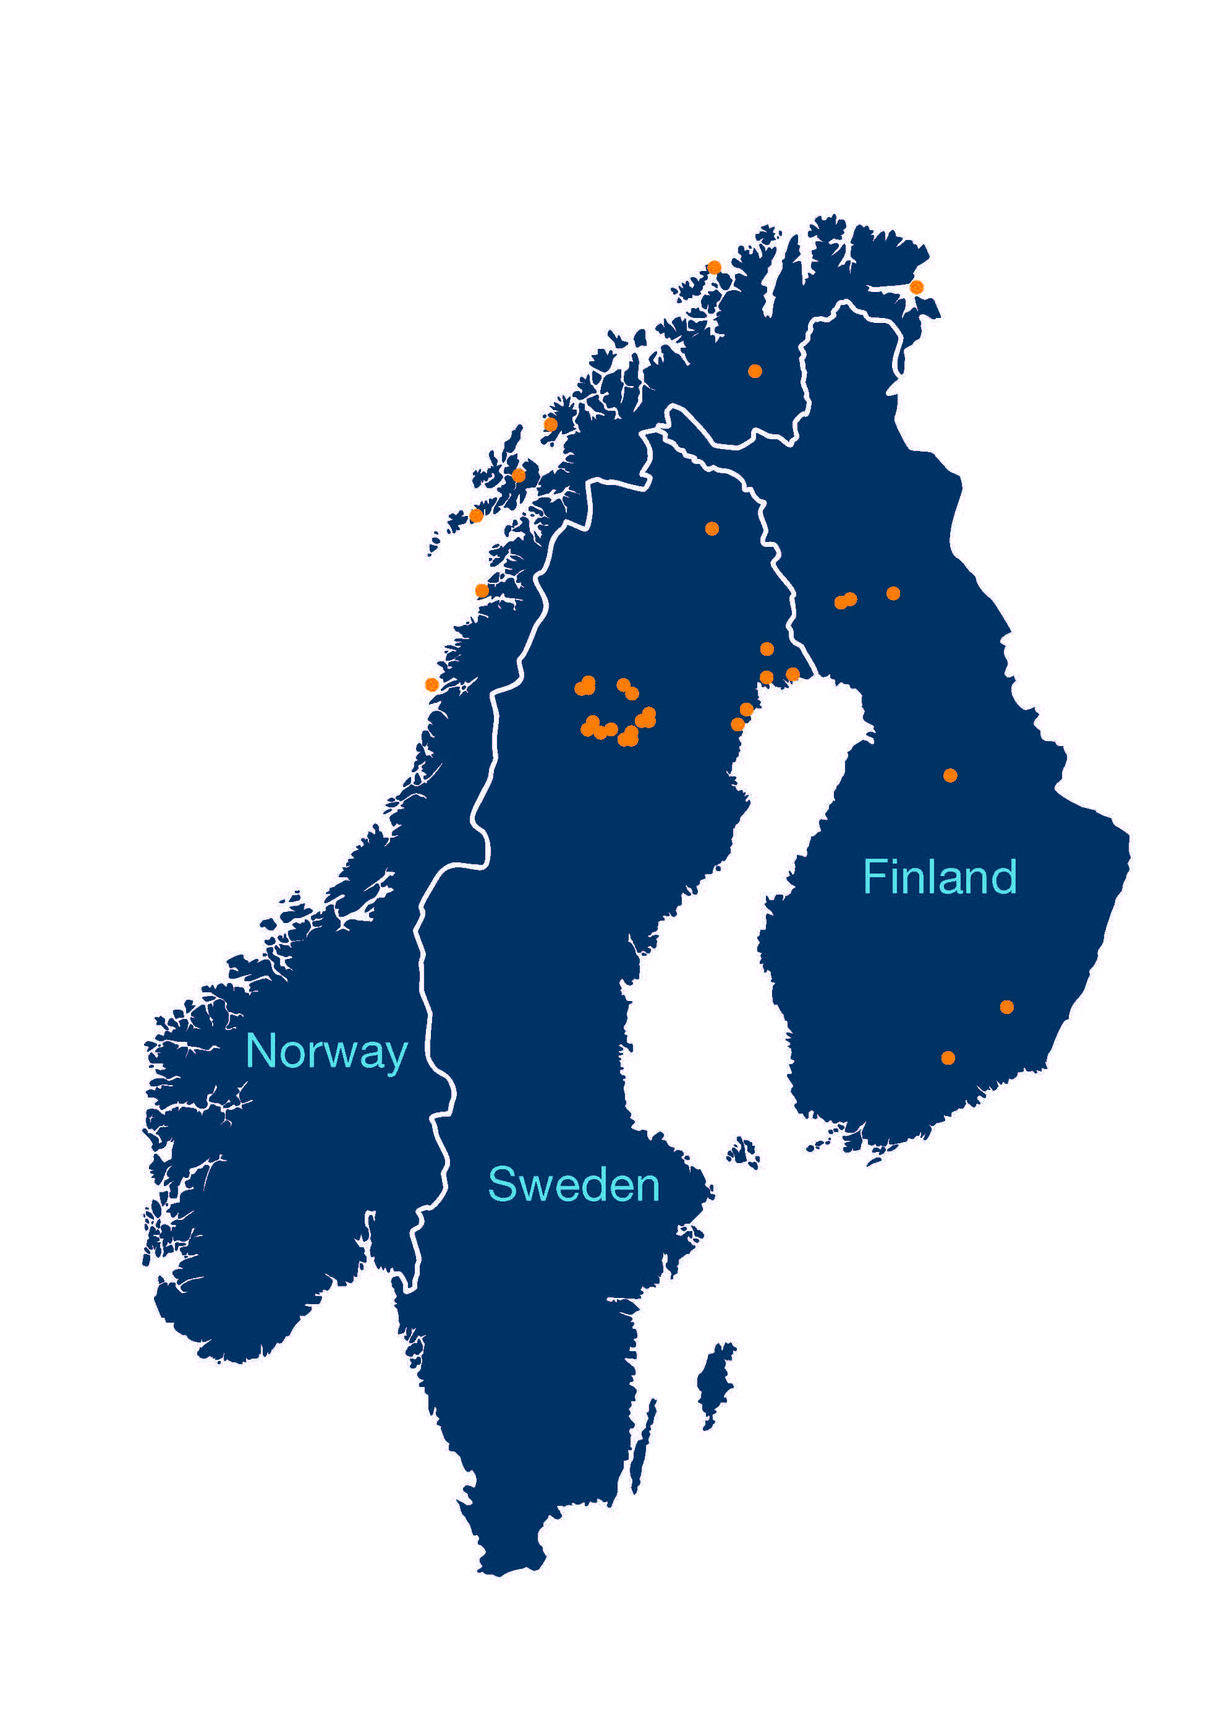 Map over northern Finland, Sweden and Norway in blue